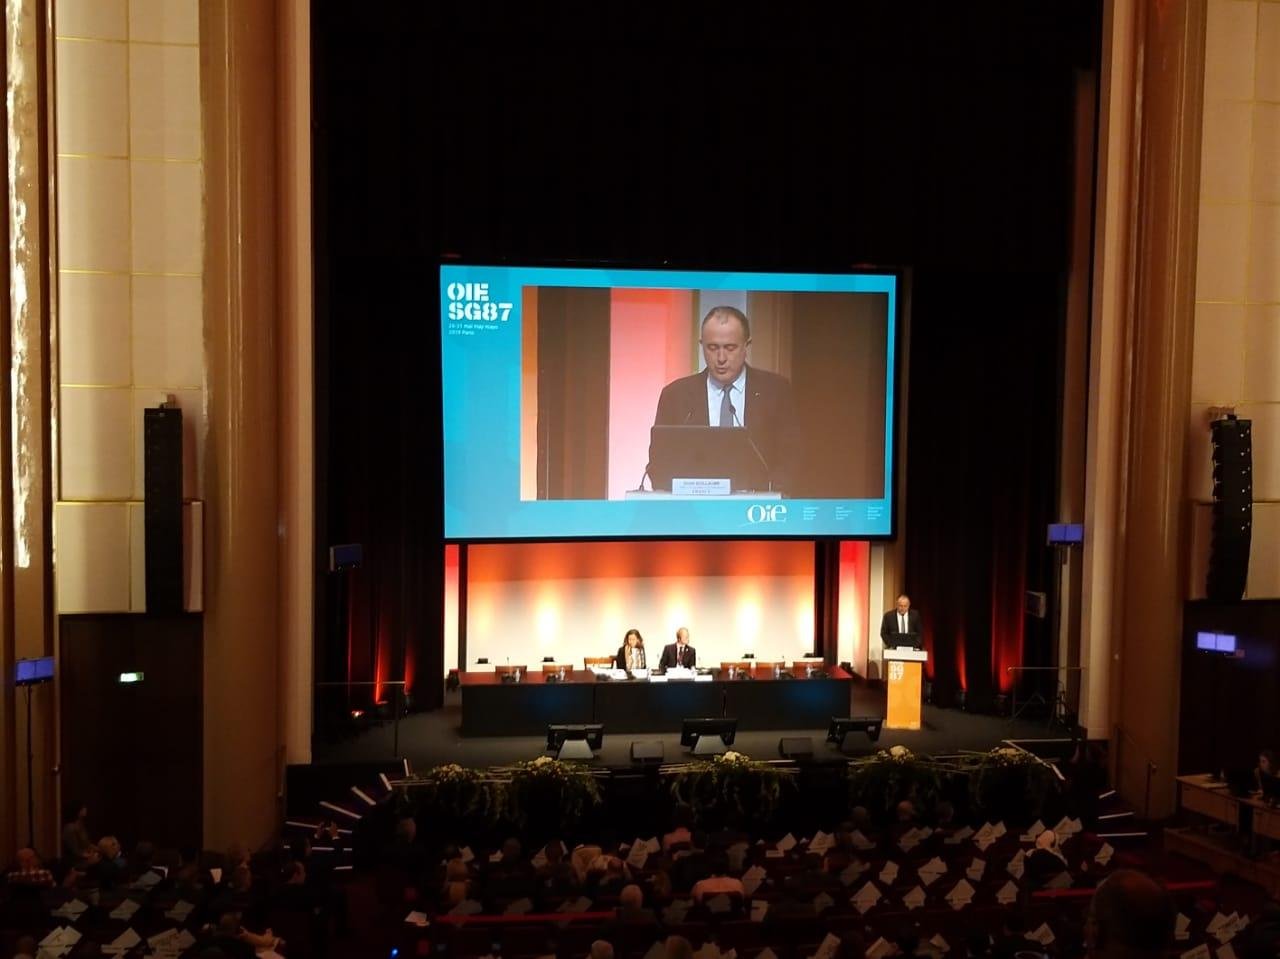 May 23 to 27 – General Assembly of the World Organization for Animal Health – OIE